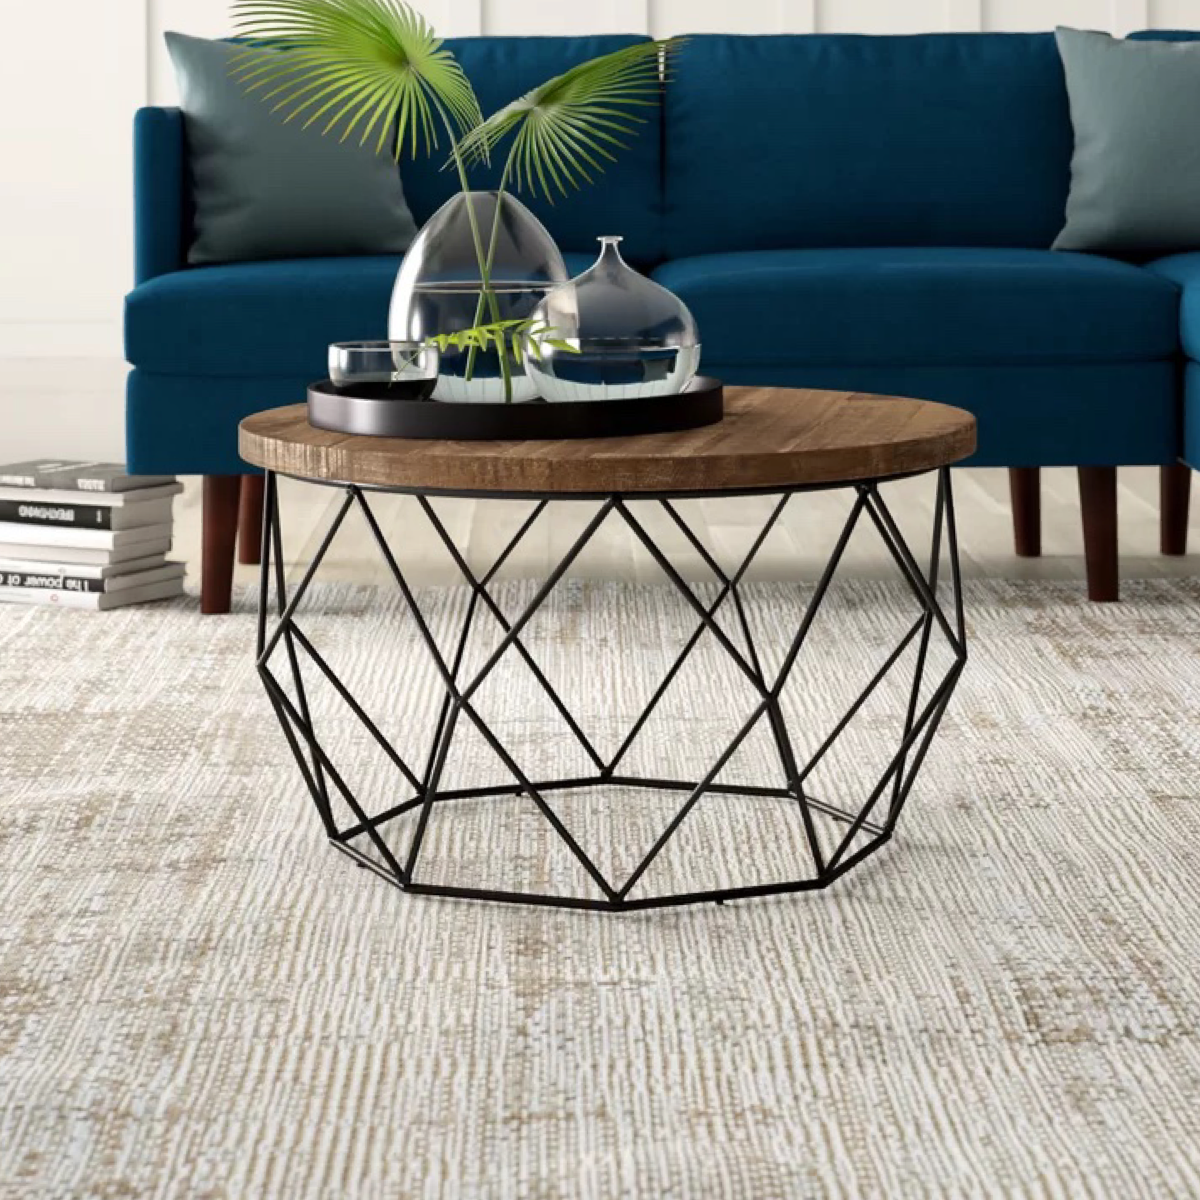 Wayfair's July 4th Sale Includes Up to 70% Off Rugs, Bedding